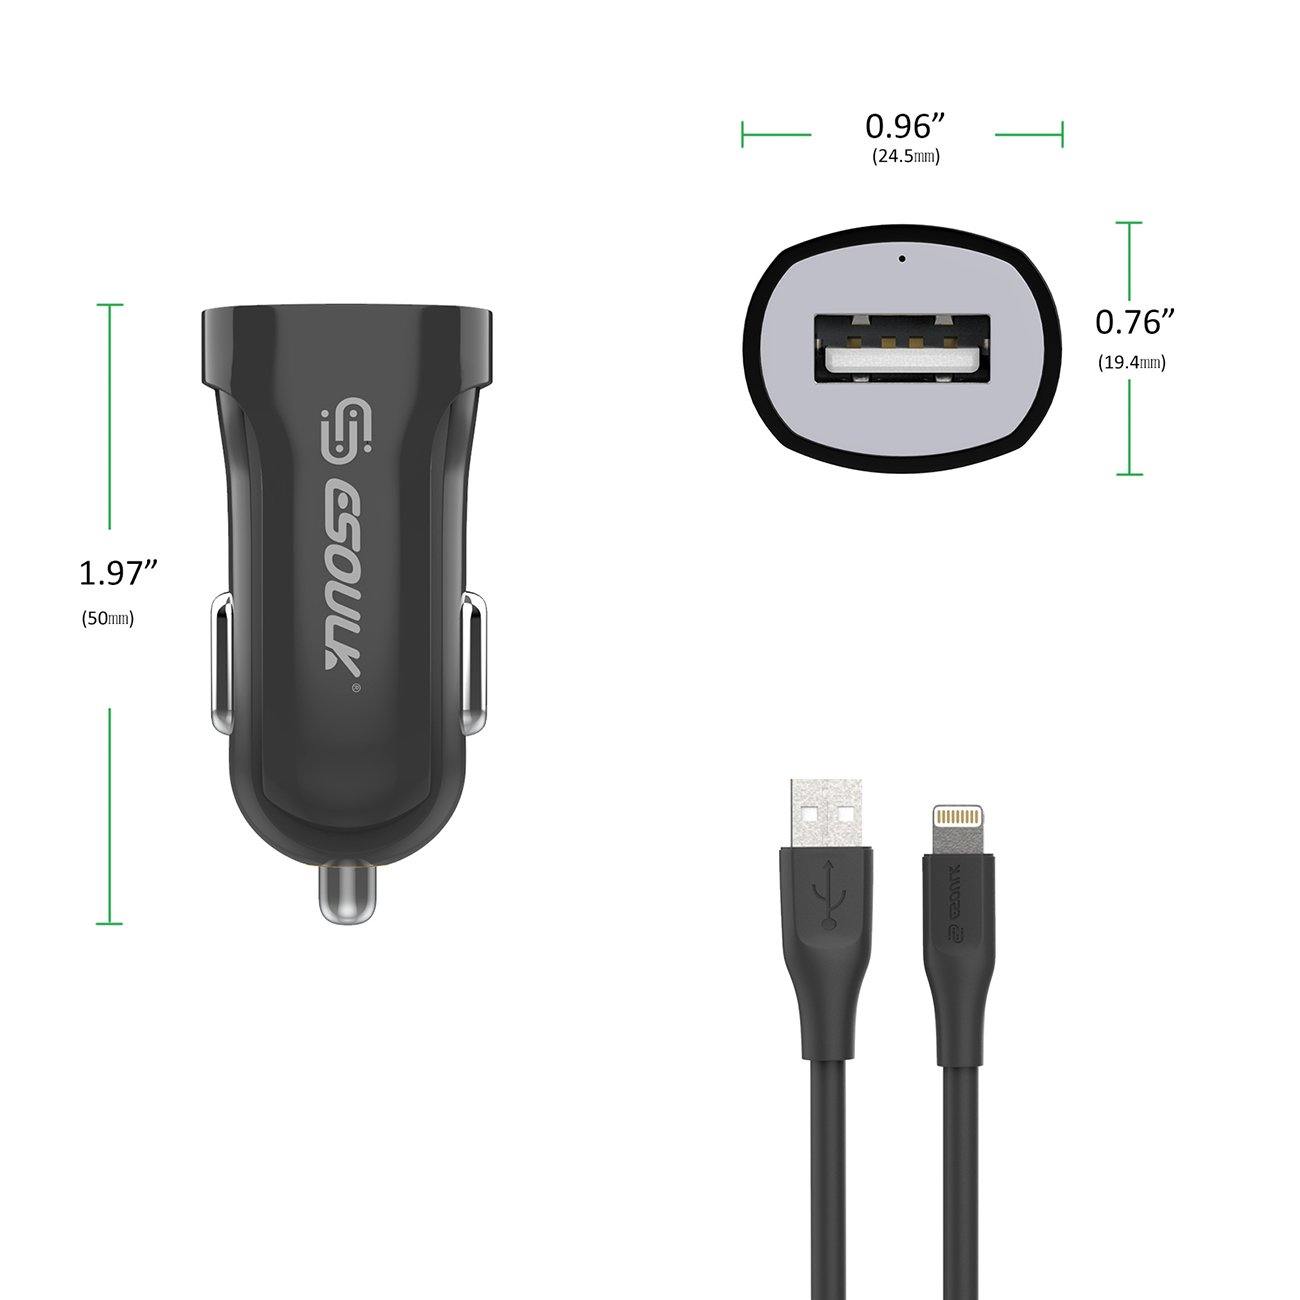 12W 2.4A Car Charger & 3ft Cable For 8 PIN In Black